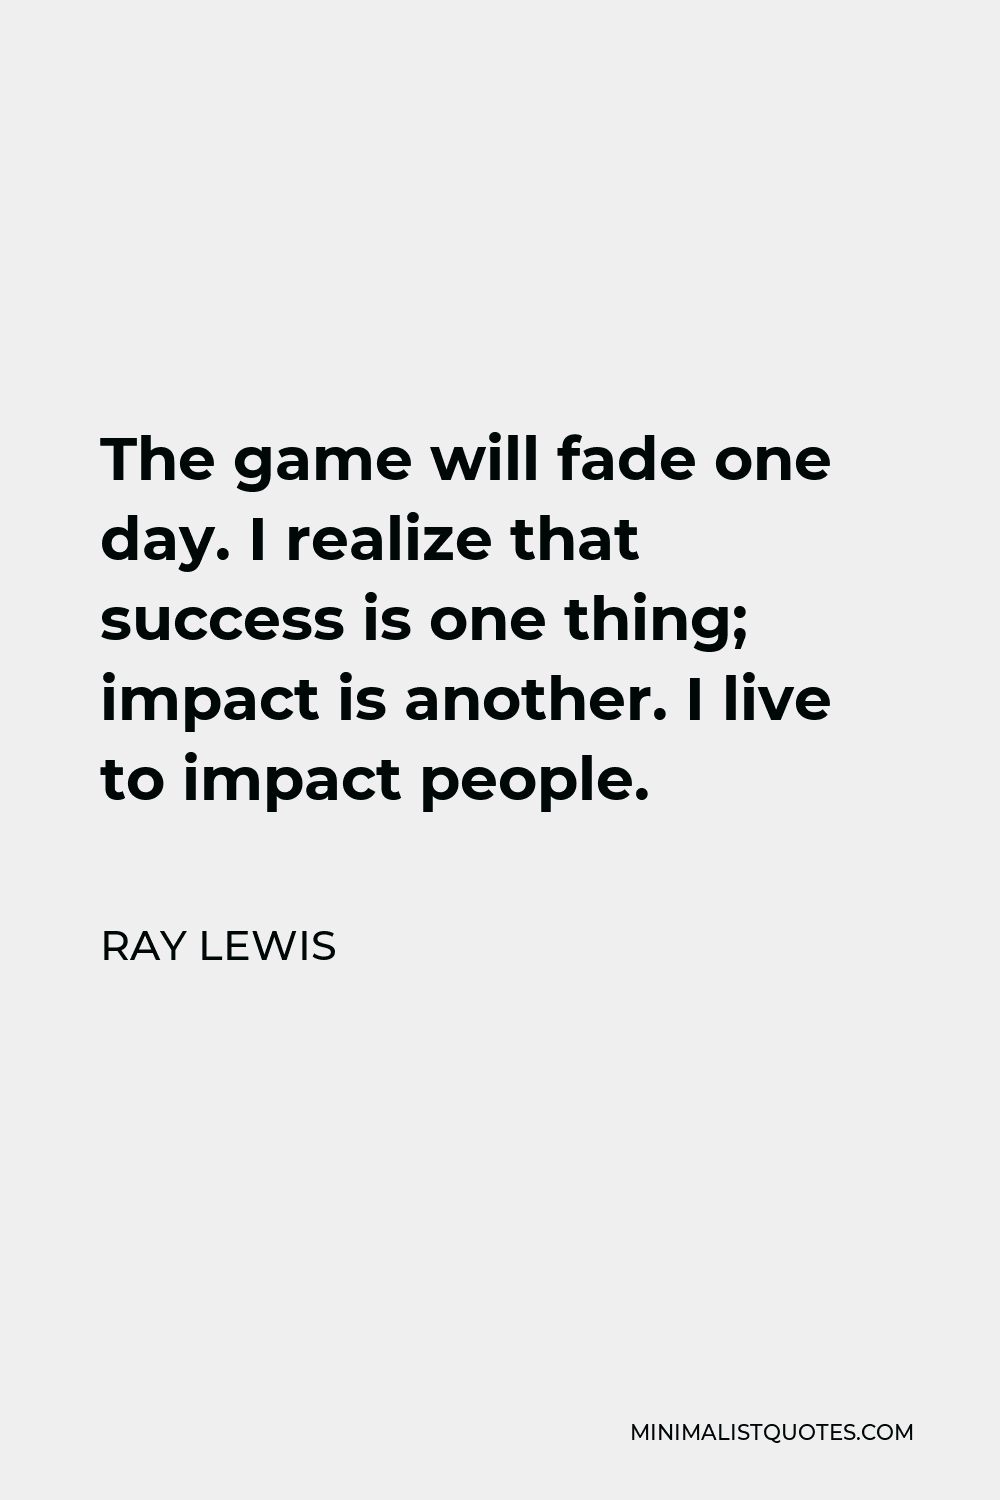 Ray Lewis Quote - The game will fade one day. I realize that success is one thing; impact is another. I live to impact people.